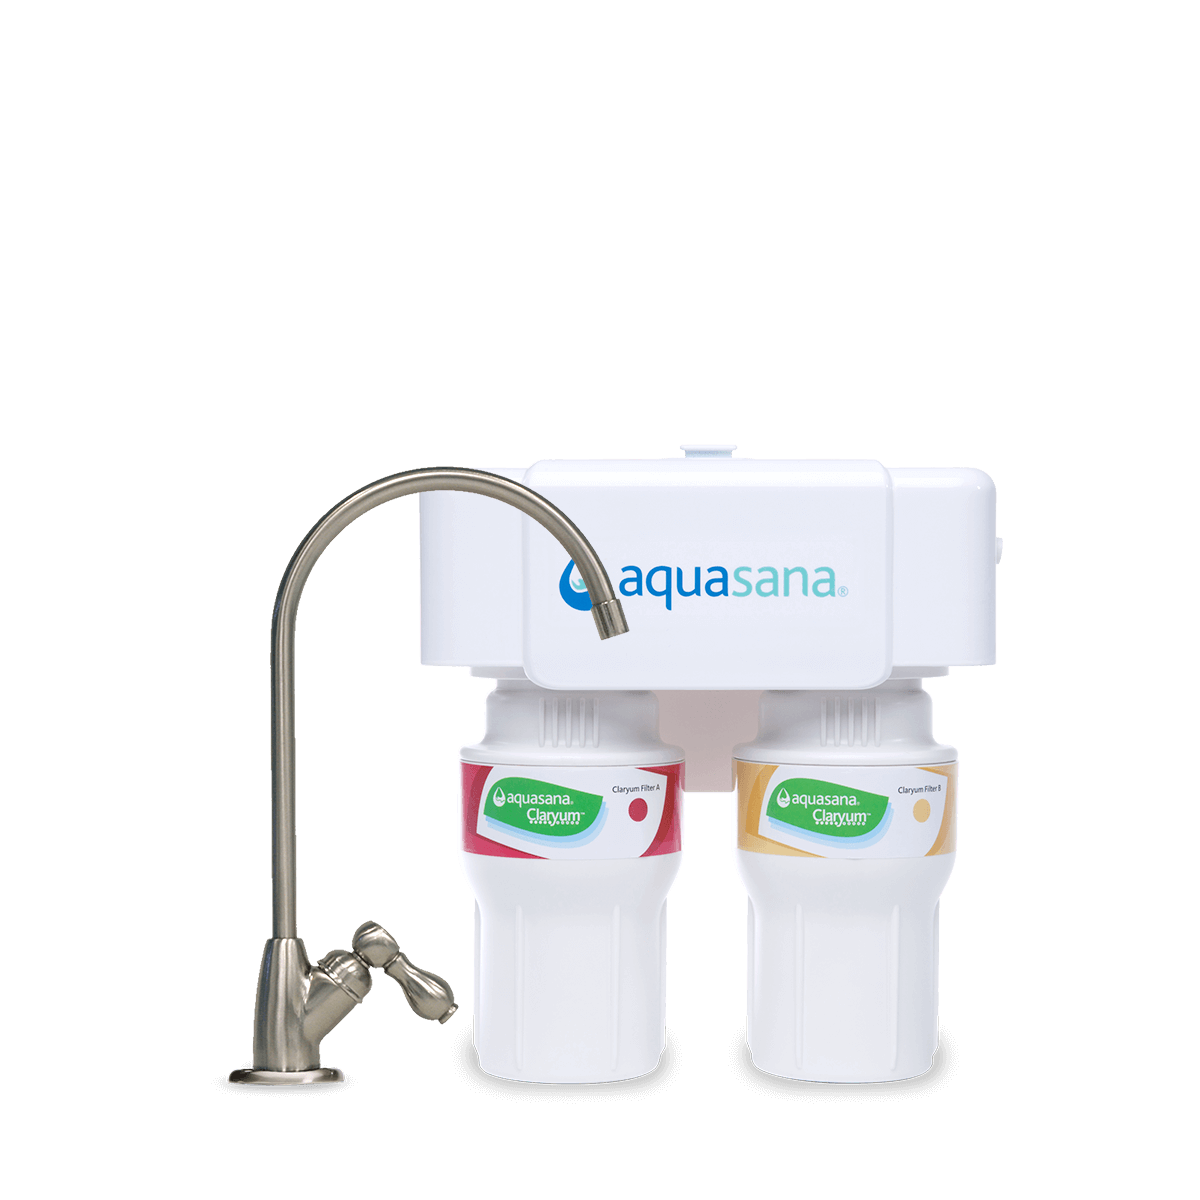 Aquasana Water Filters - 30% Off 2-Stage Under-Sink Filter